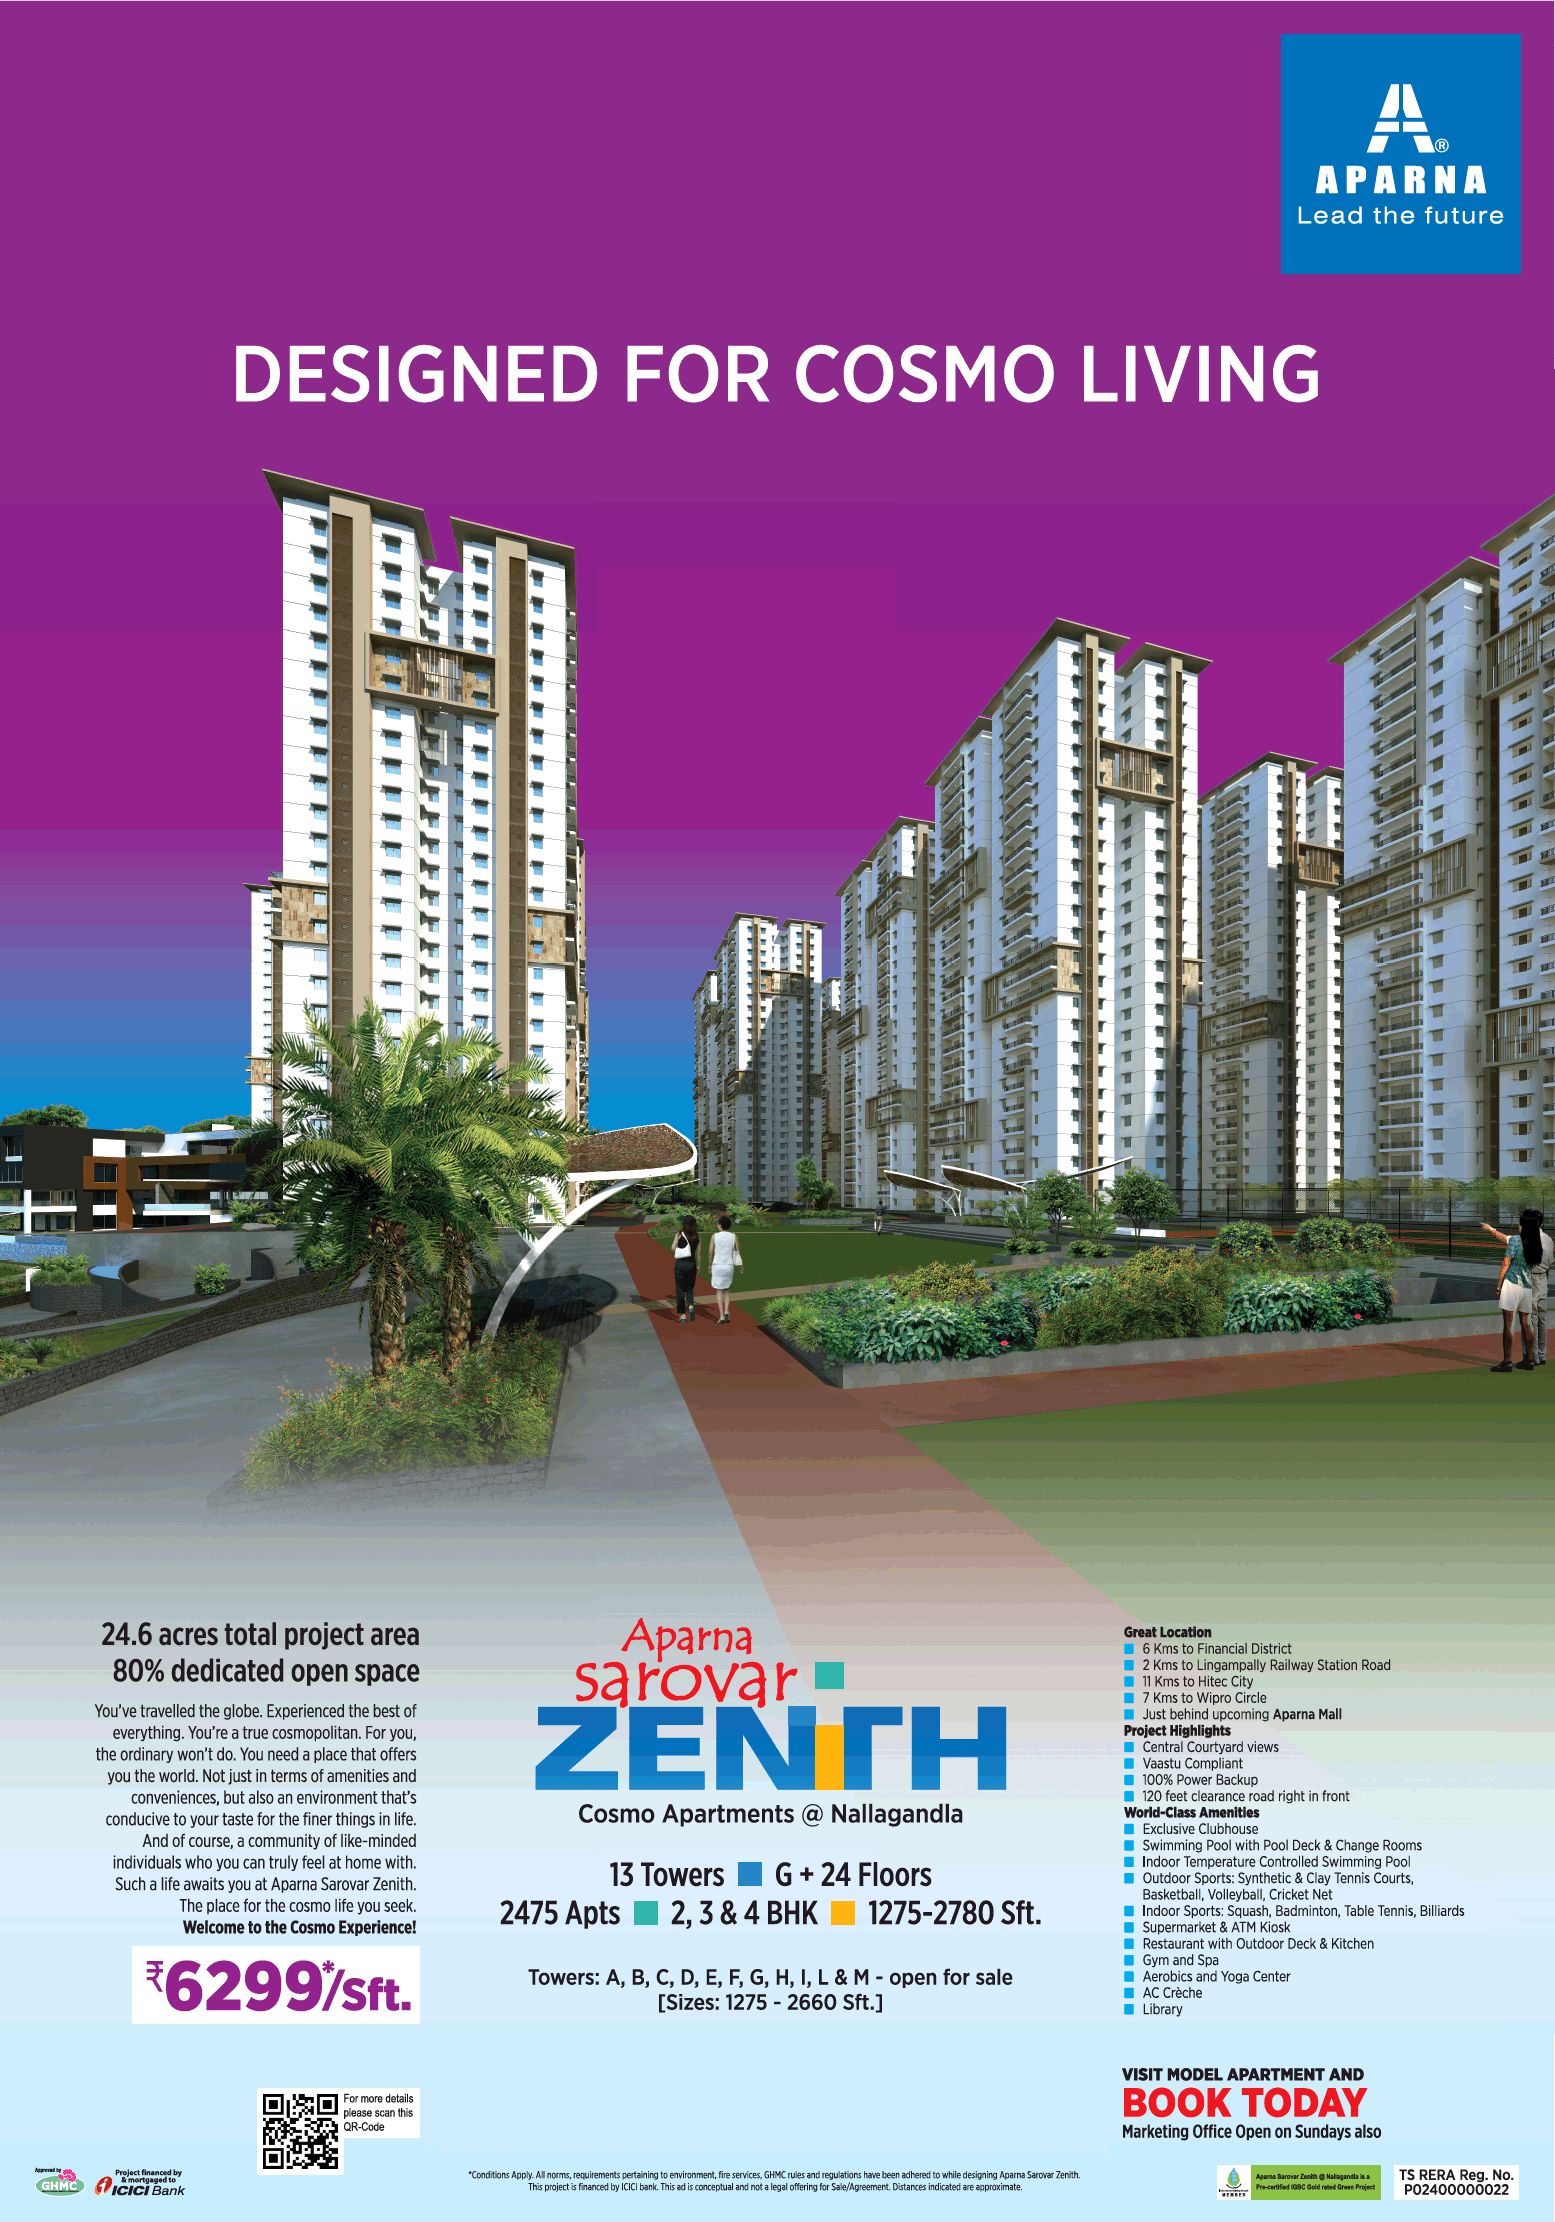 Designed for cosmo living at Aparna Sarovar Zenith in Hyderabad Update